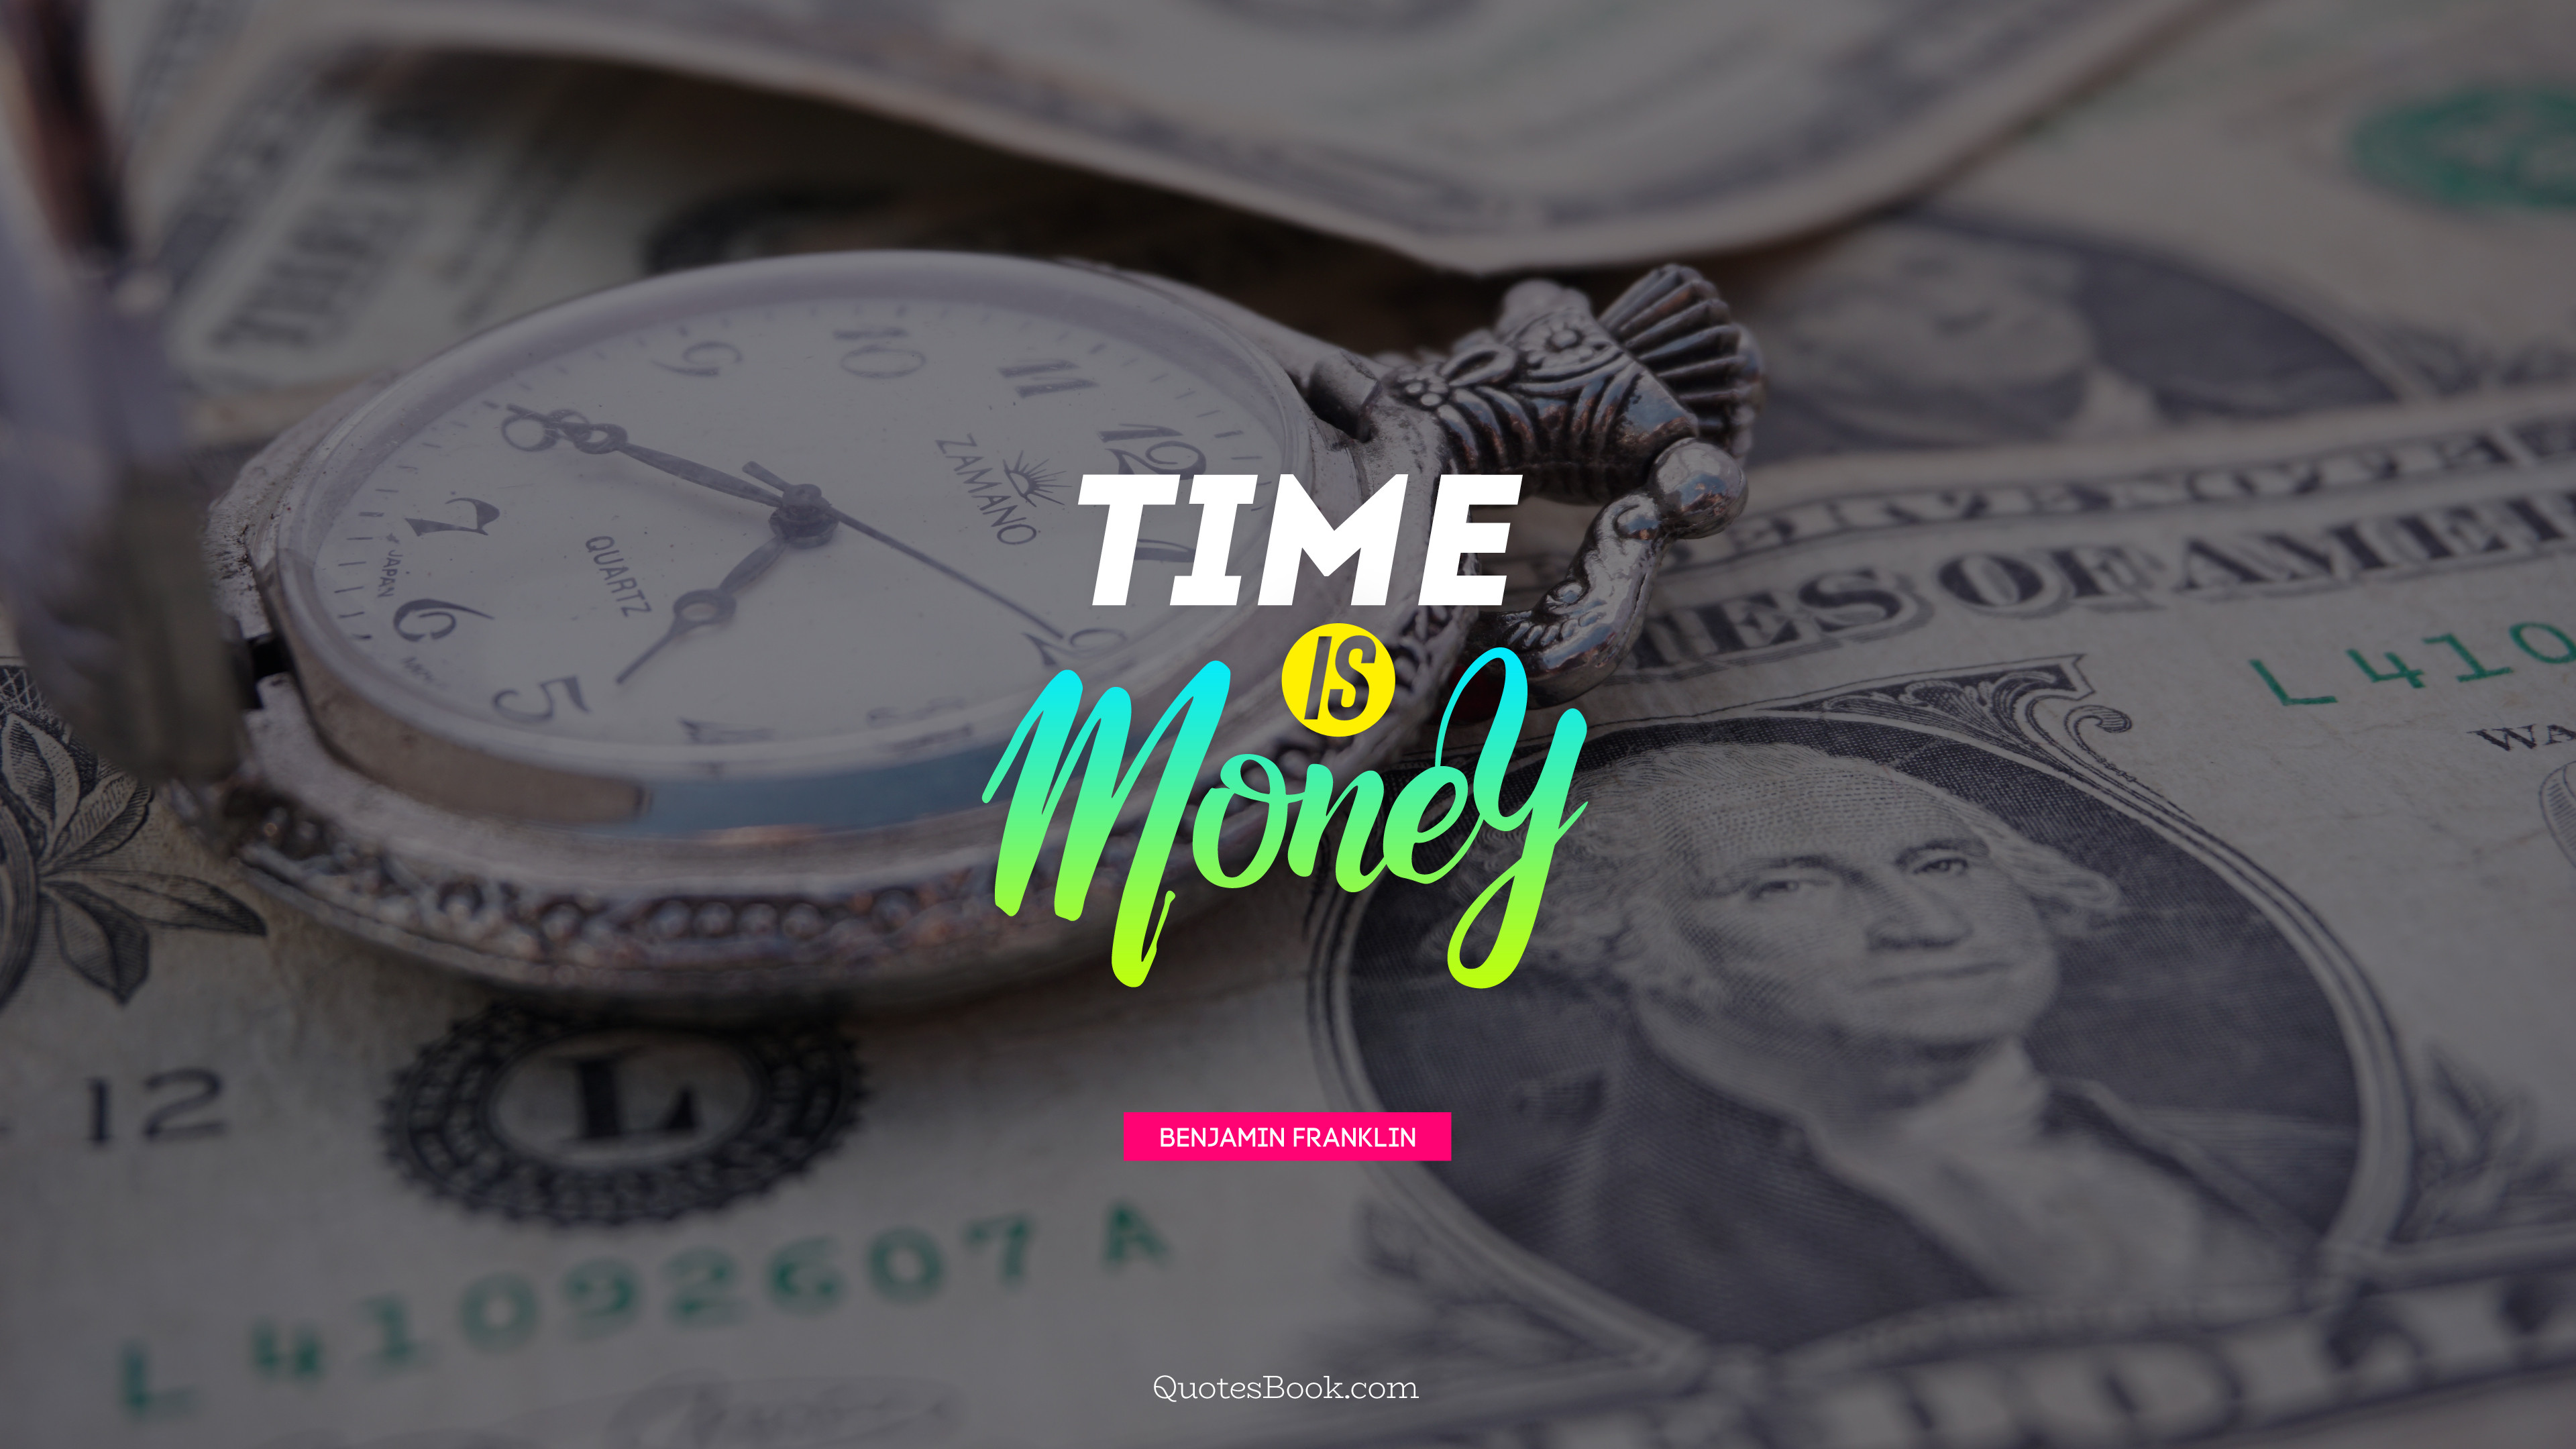 Time Is Money Background Images HD Pictures and Wallpaper For Free  Download  Pngtree